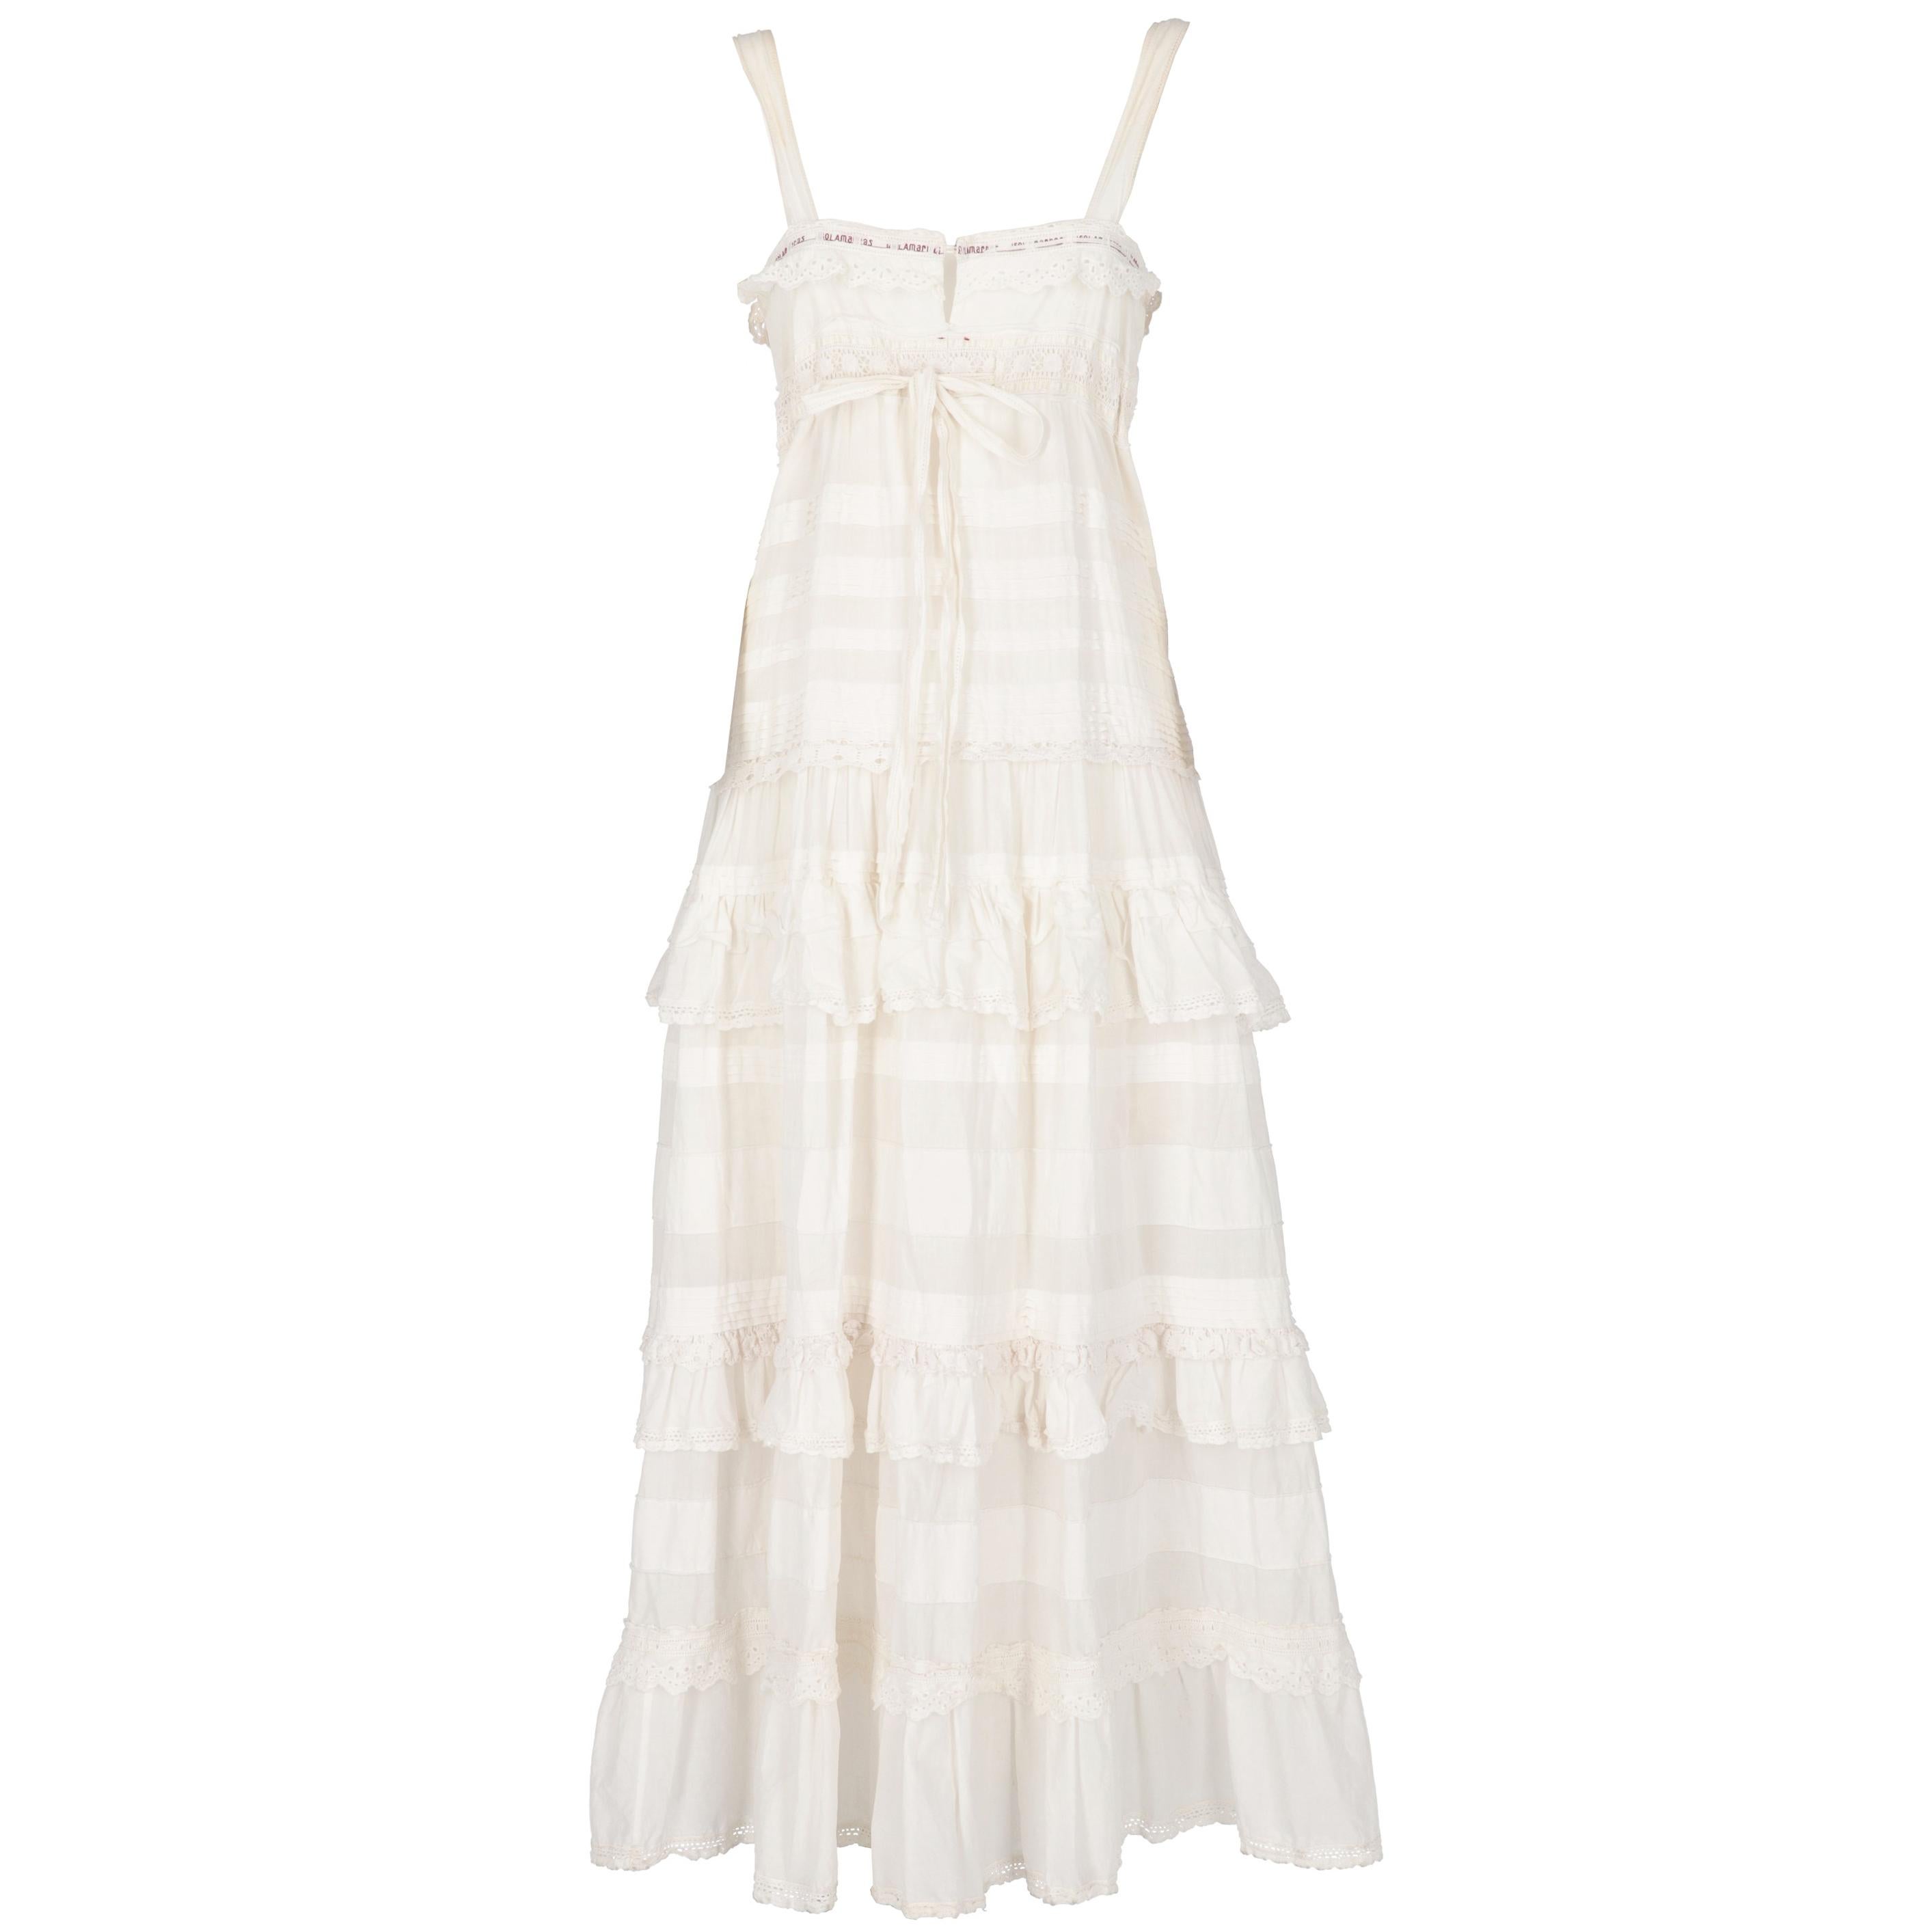 This lovely I'm Isola Marras by Antonio Marras white cotton long dress with shoulder straps features a zip and button front fastening, an original red embroidered branded drawstring on the chest and pleated inserts with crochet laces on the top. The